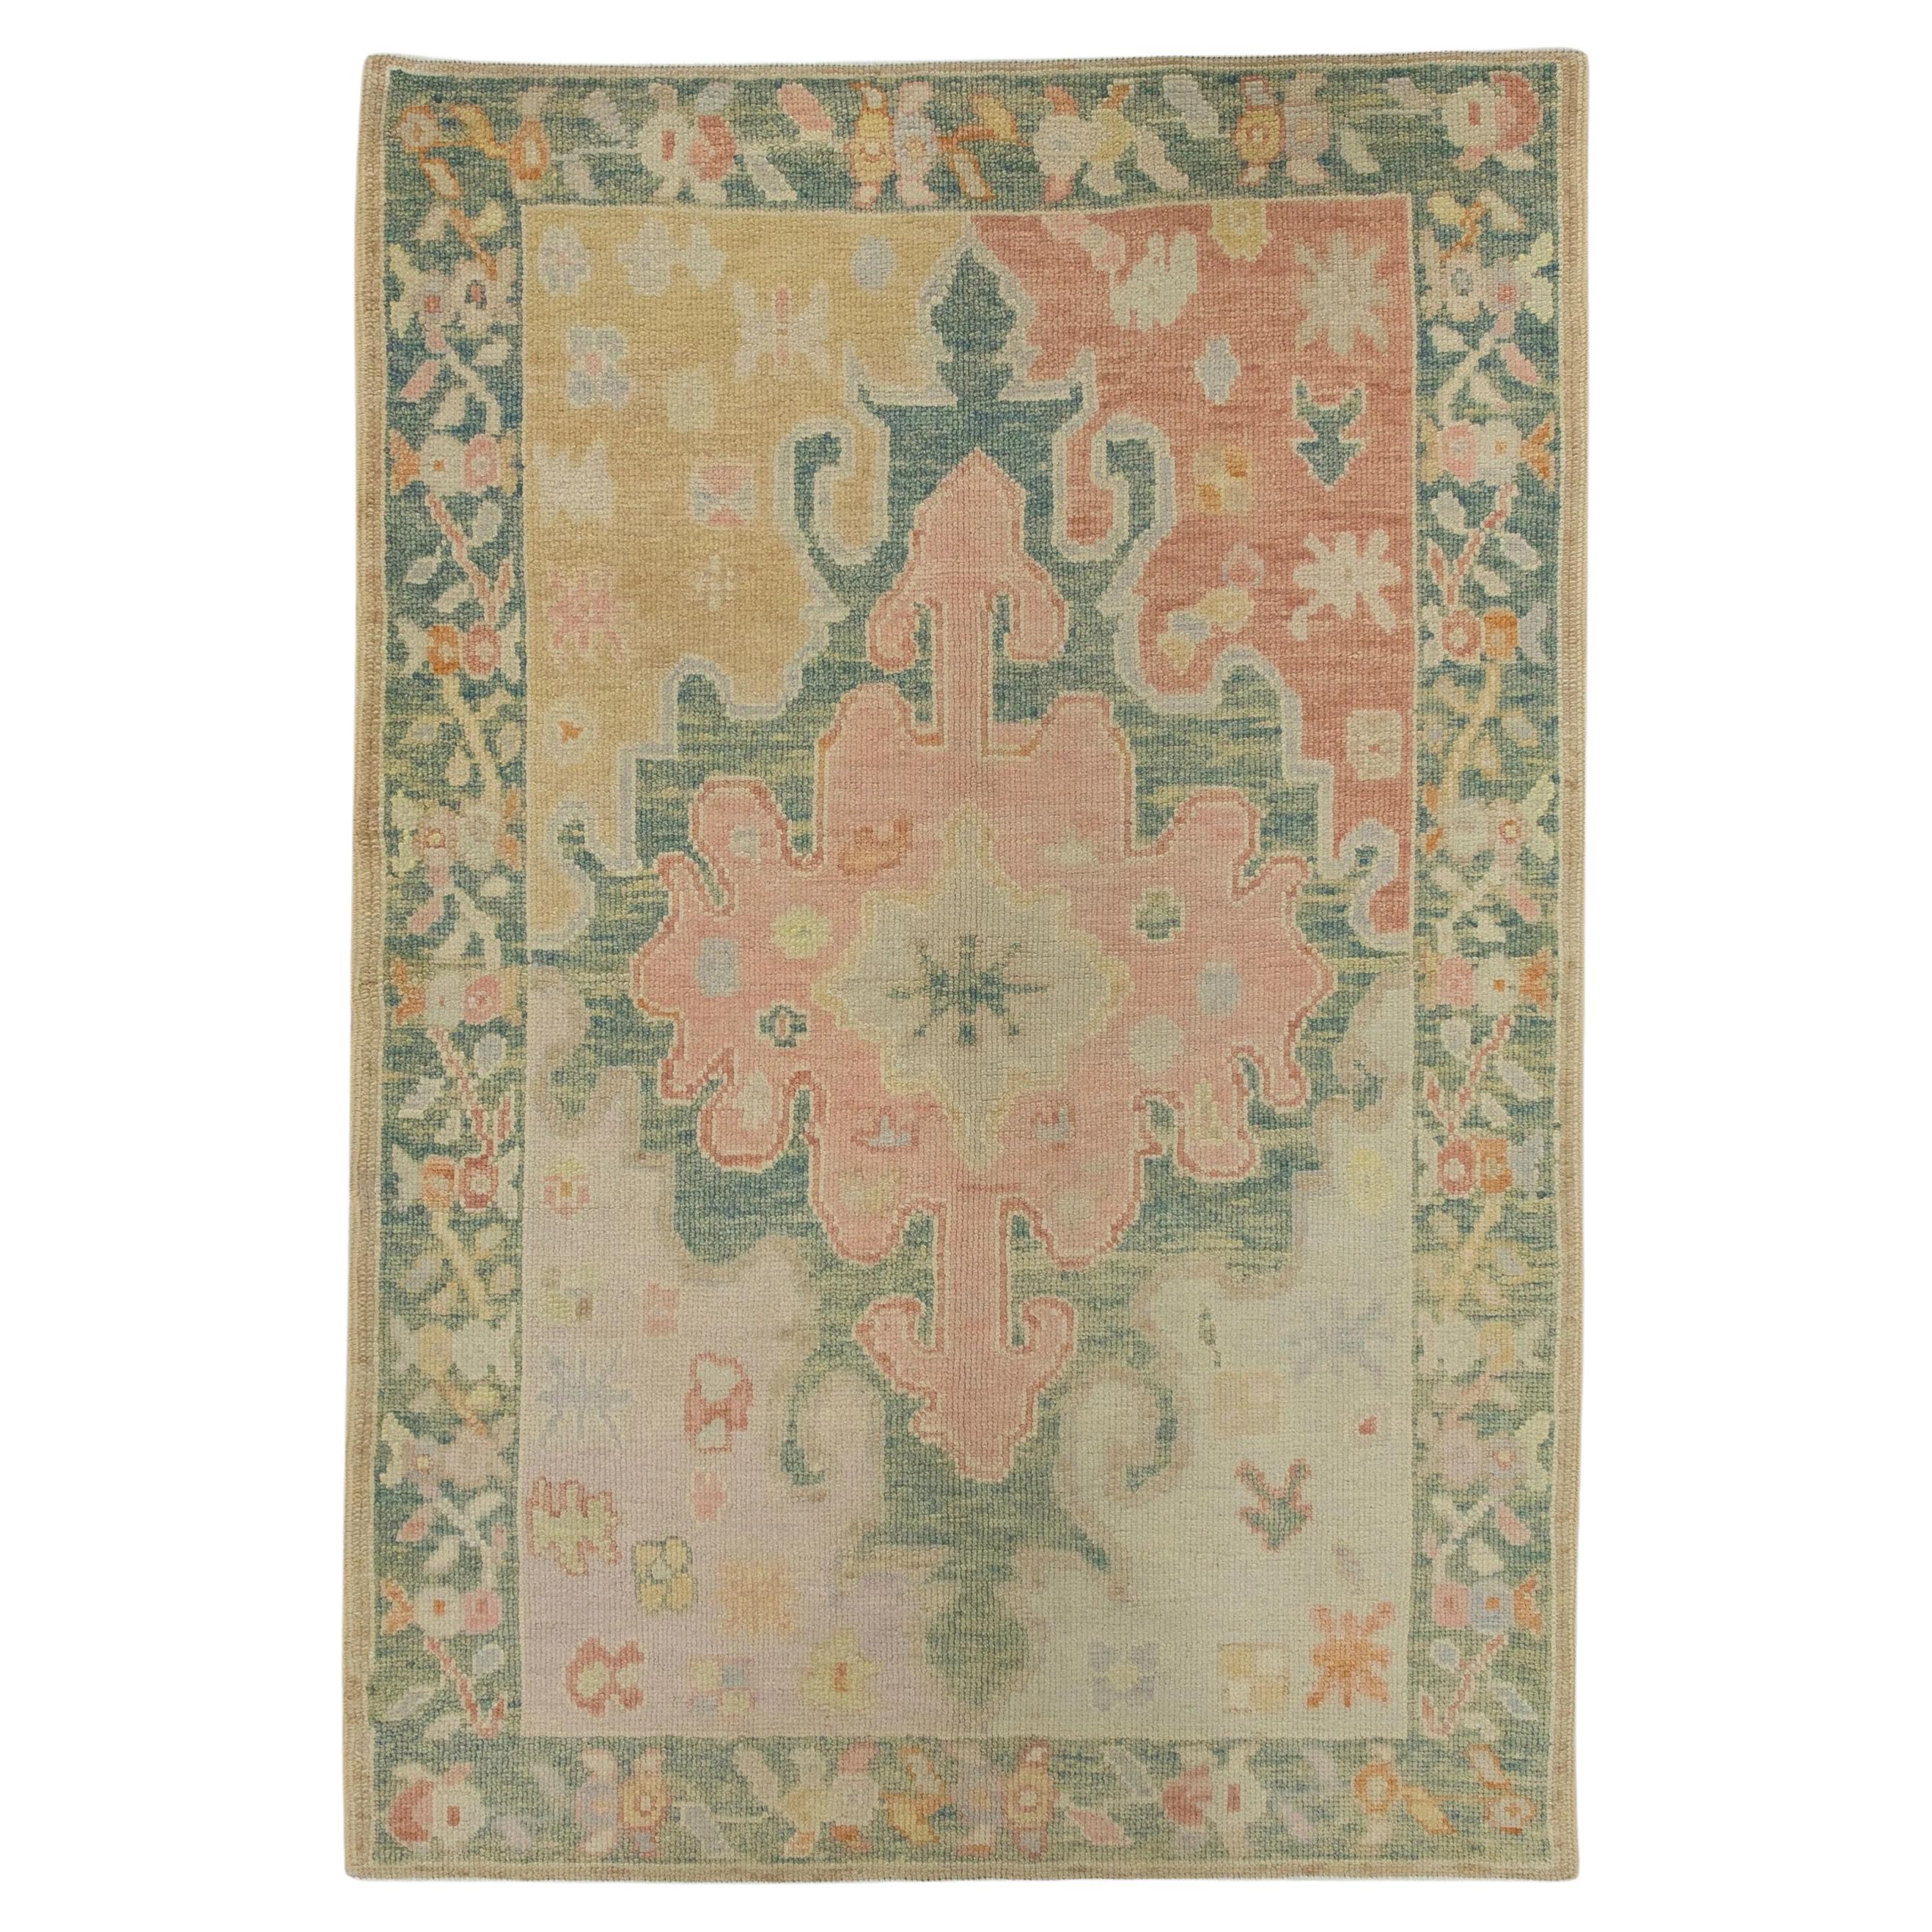 Green and Pink Floral Handwoven Wool Turkish Oushak Rug 4'1" x 6'1"